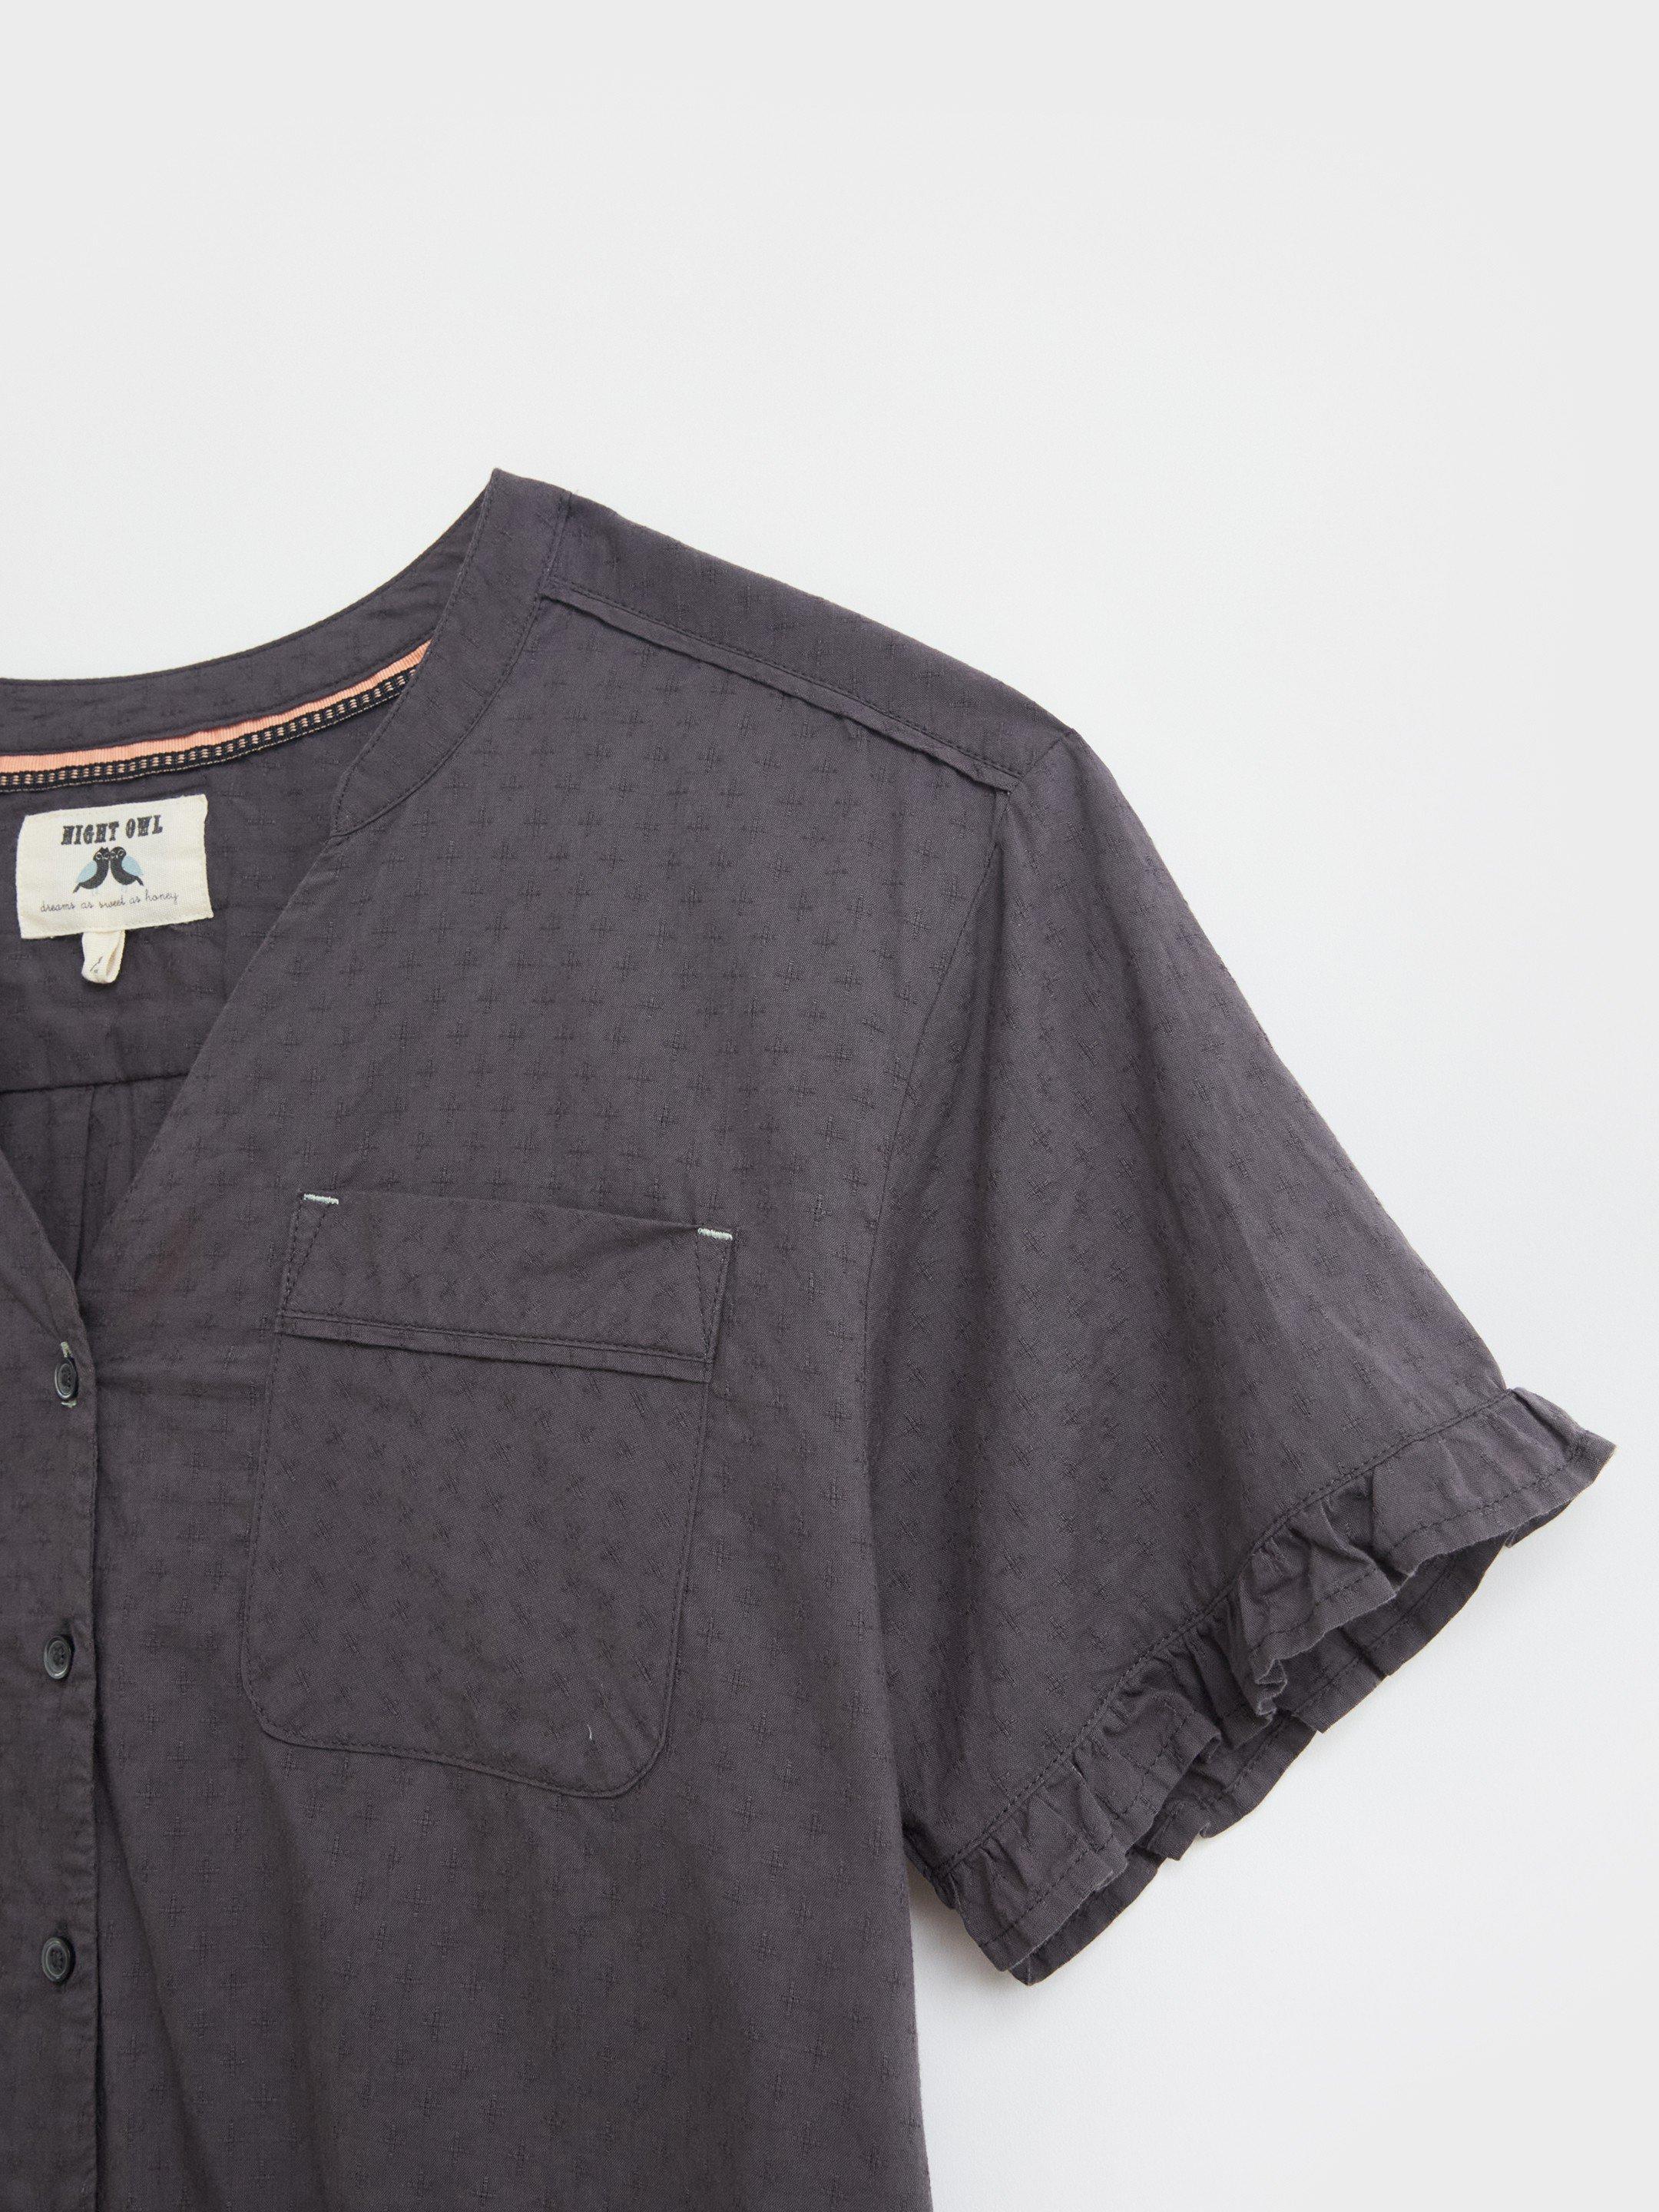 Fiona Frill PJ Shirt in WASHED BLK - FLAT DETAIL